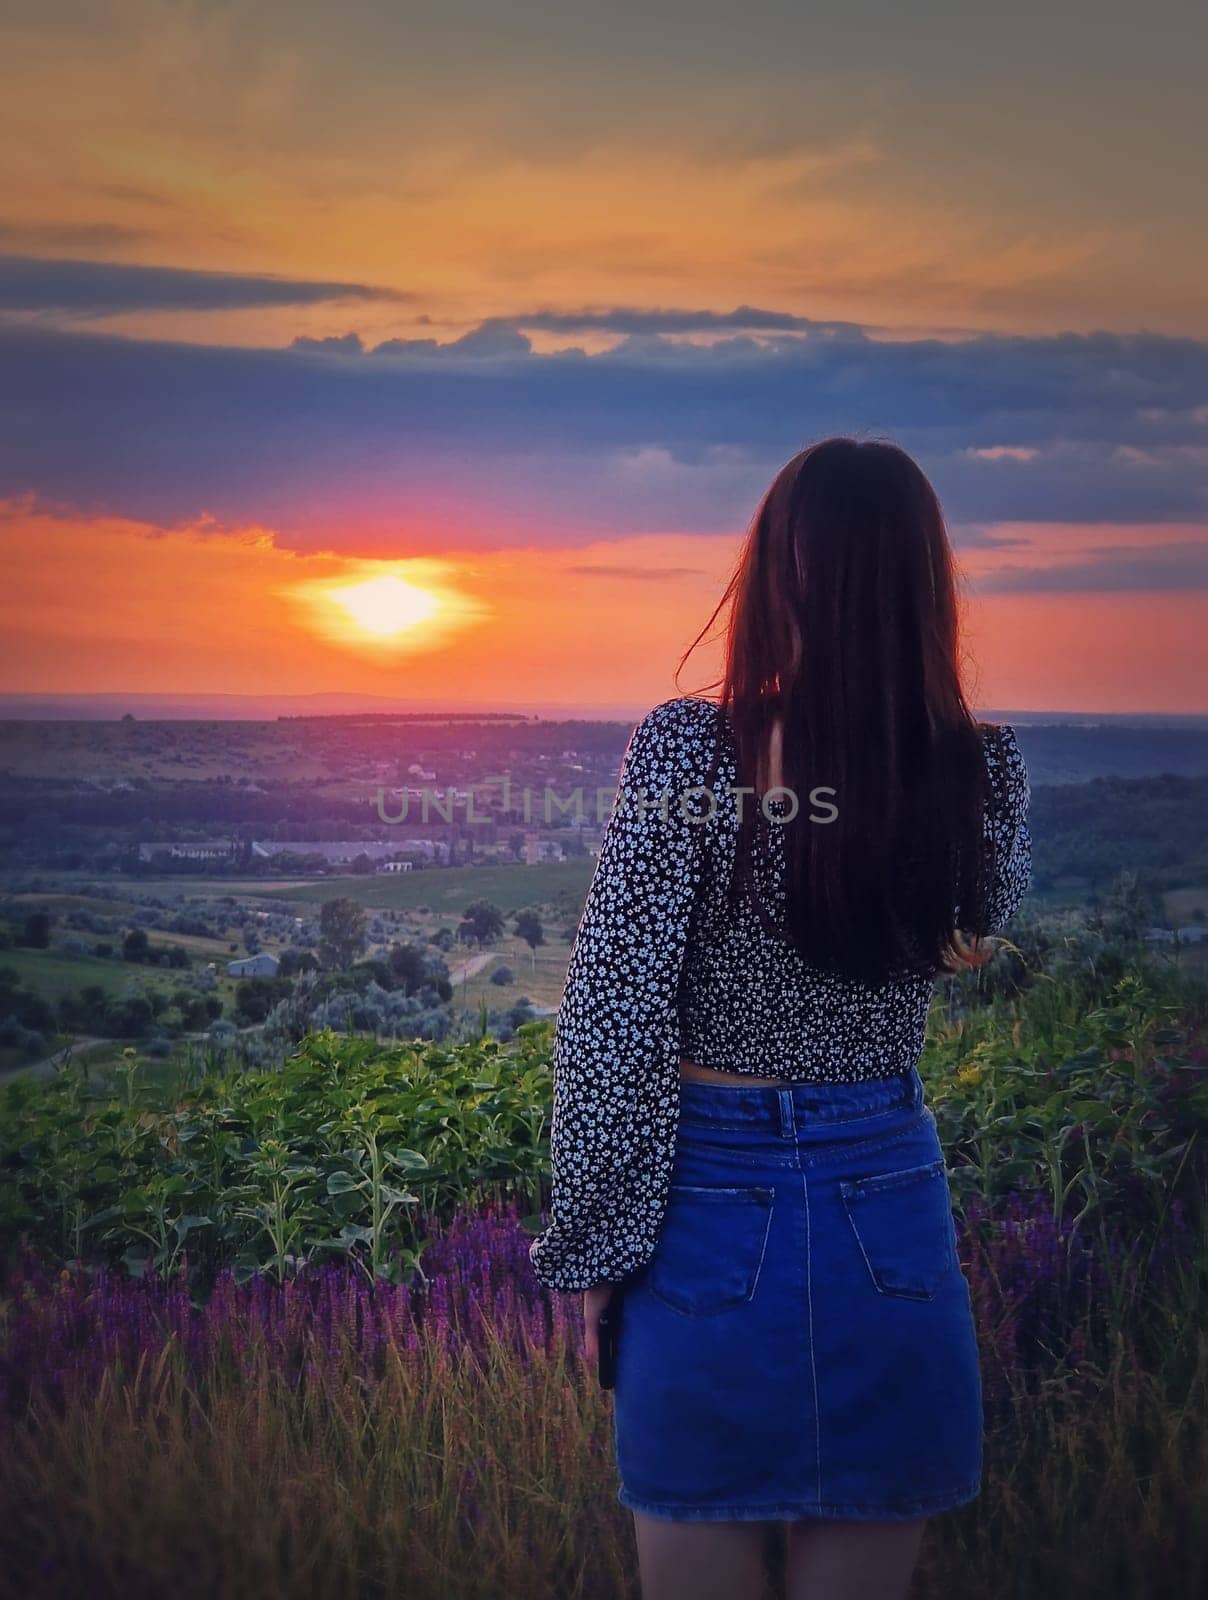 Rear view of a woman in skirt watching the sunset over the valley. Natural summer dusk scene by psychoshadow